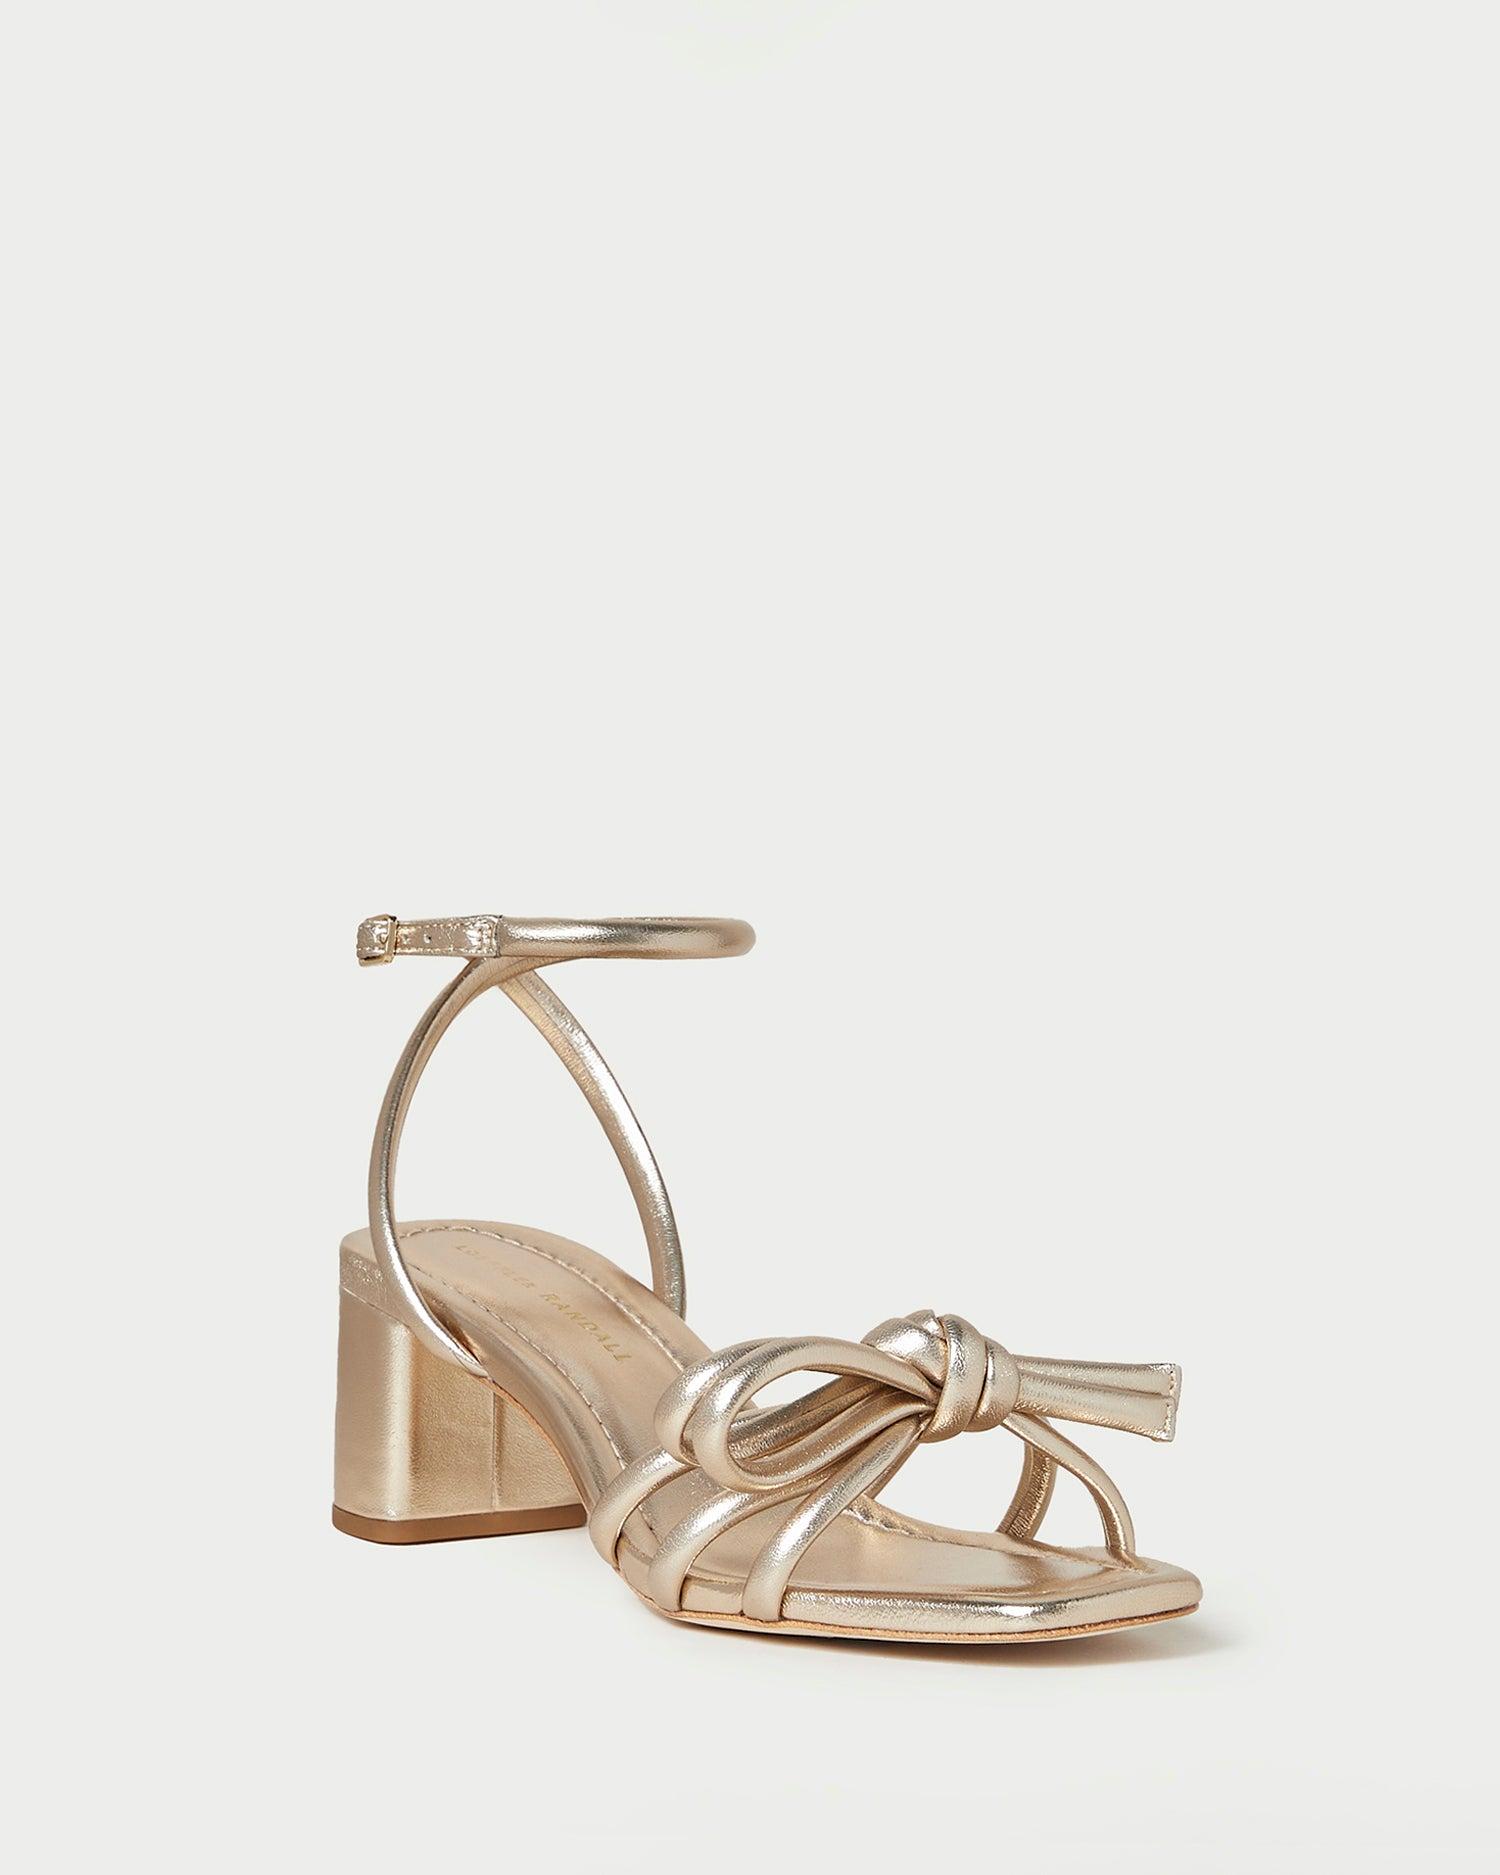 Loeffler Randall Mikel Champagne Bow Mid-heel Sandal in Natural | Lyst